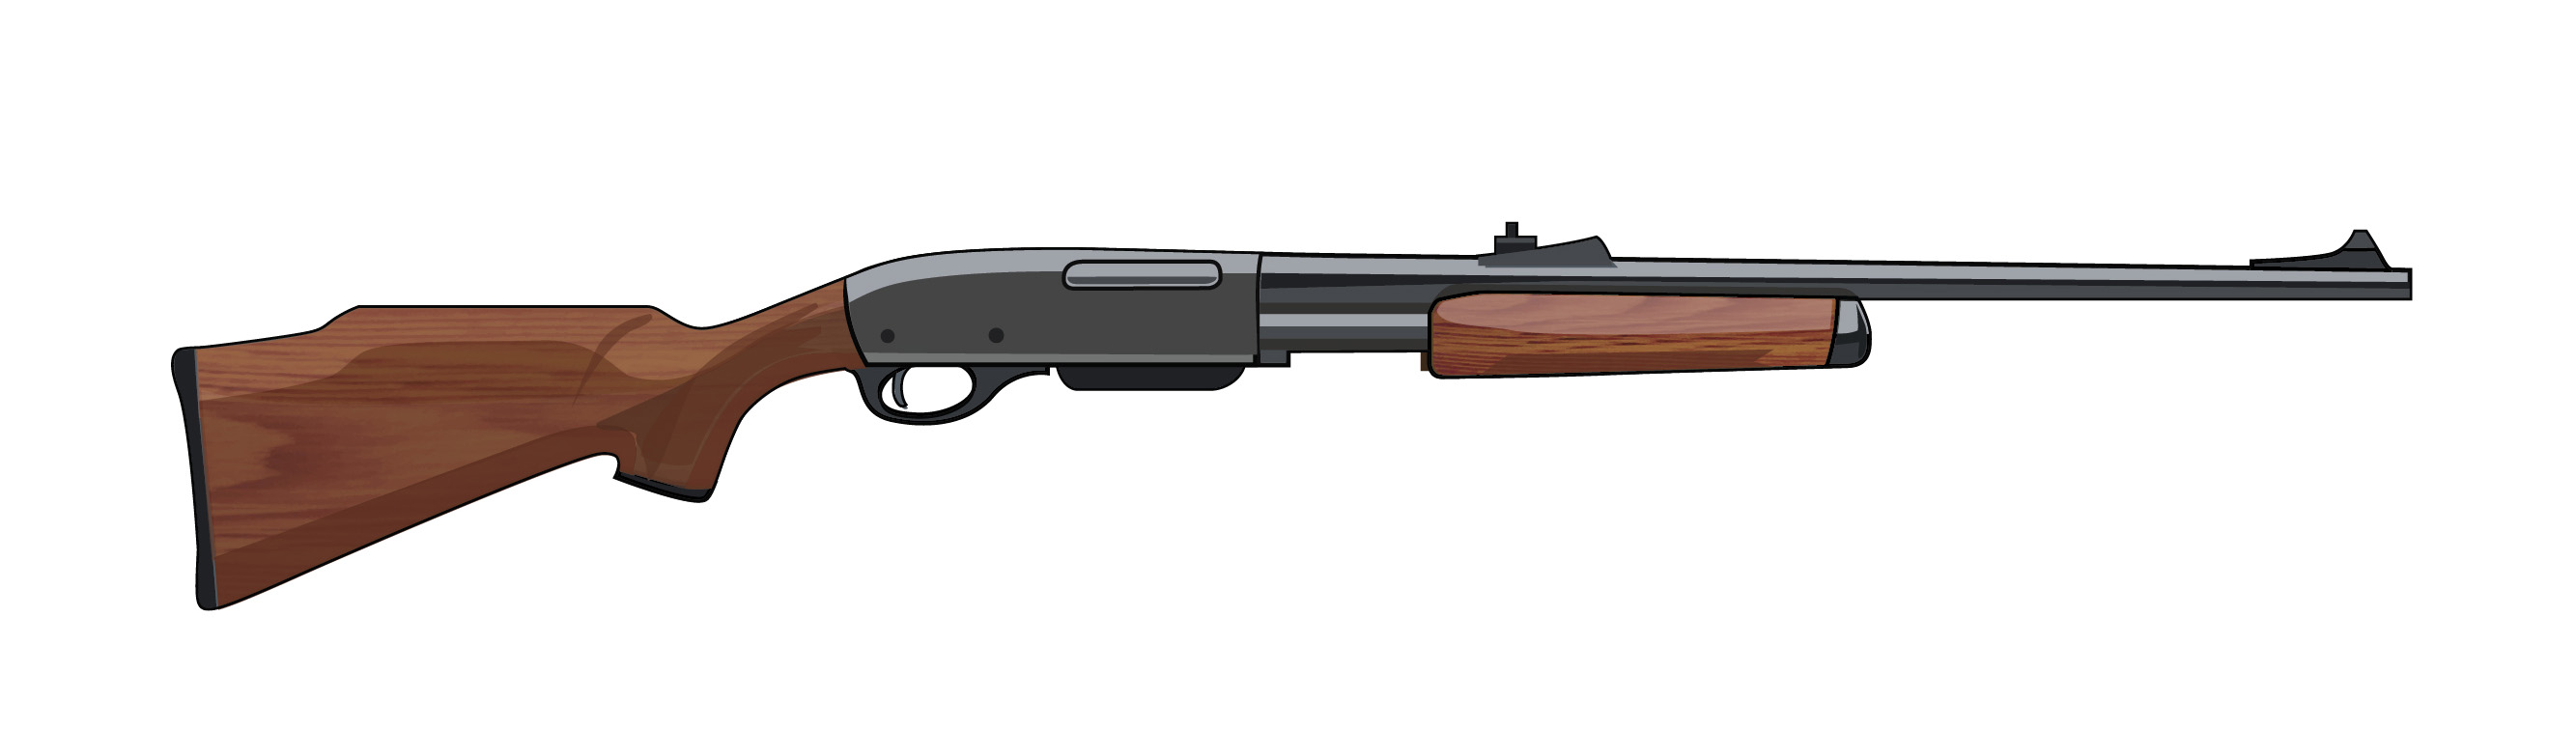 Illustration of a pump action rifle.